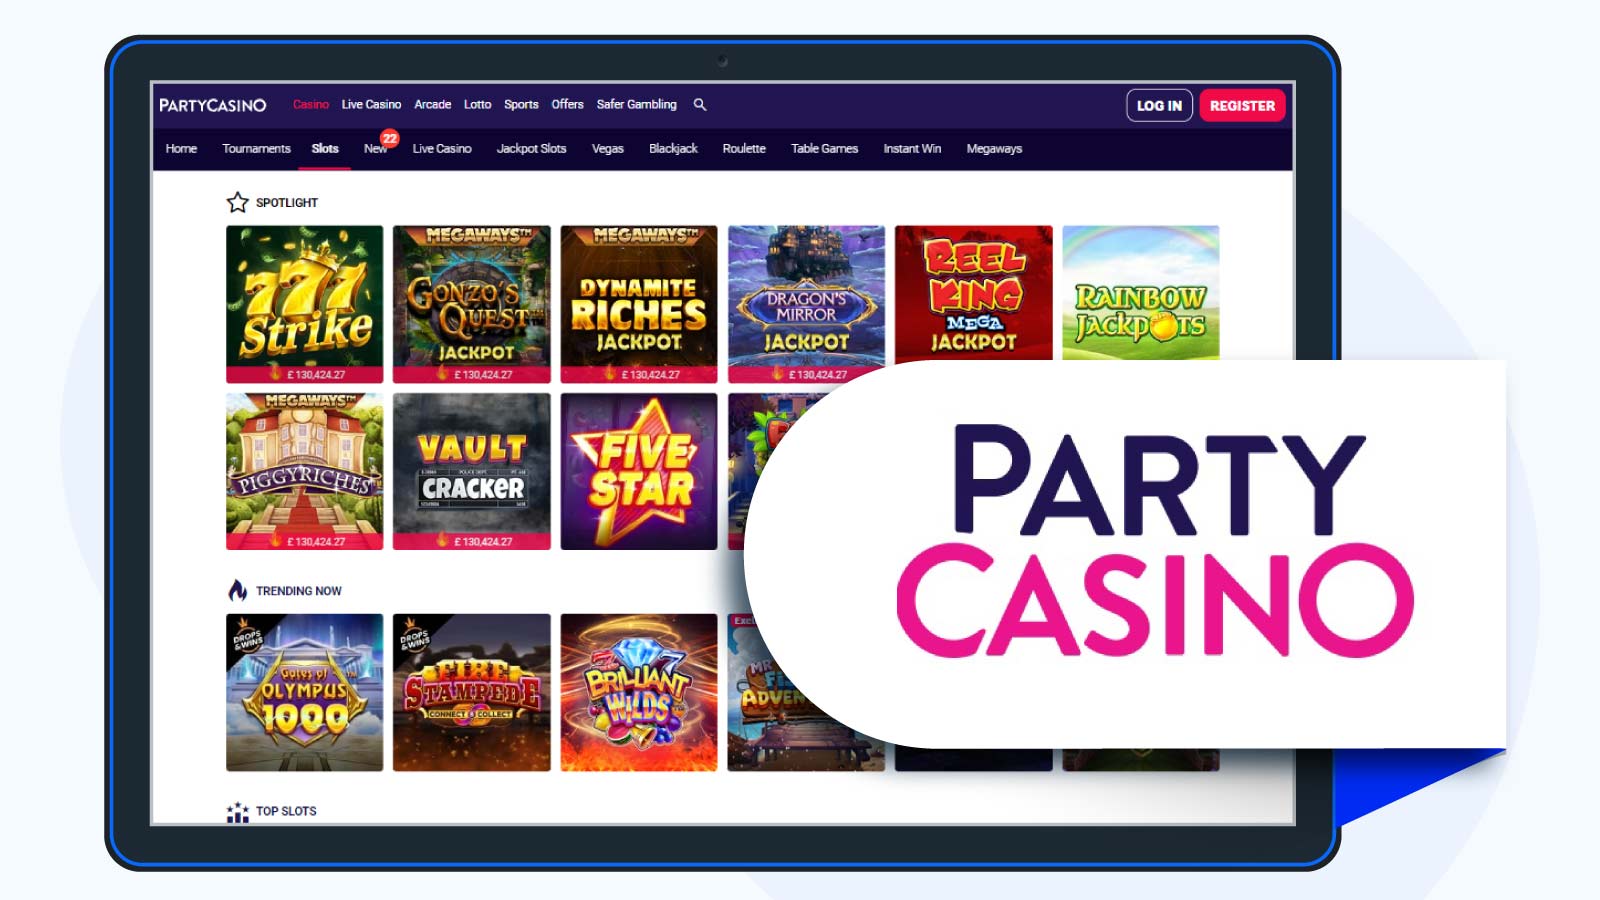 Party Casino Editor’s Choice for Low Wager Starburst Spins